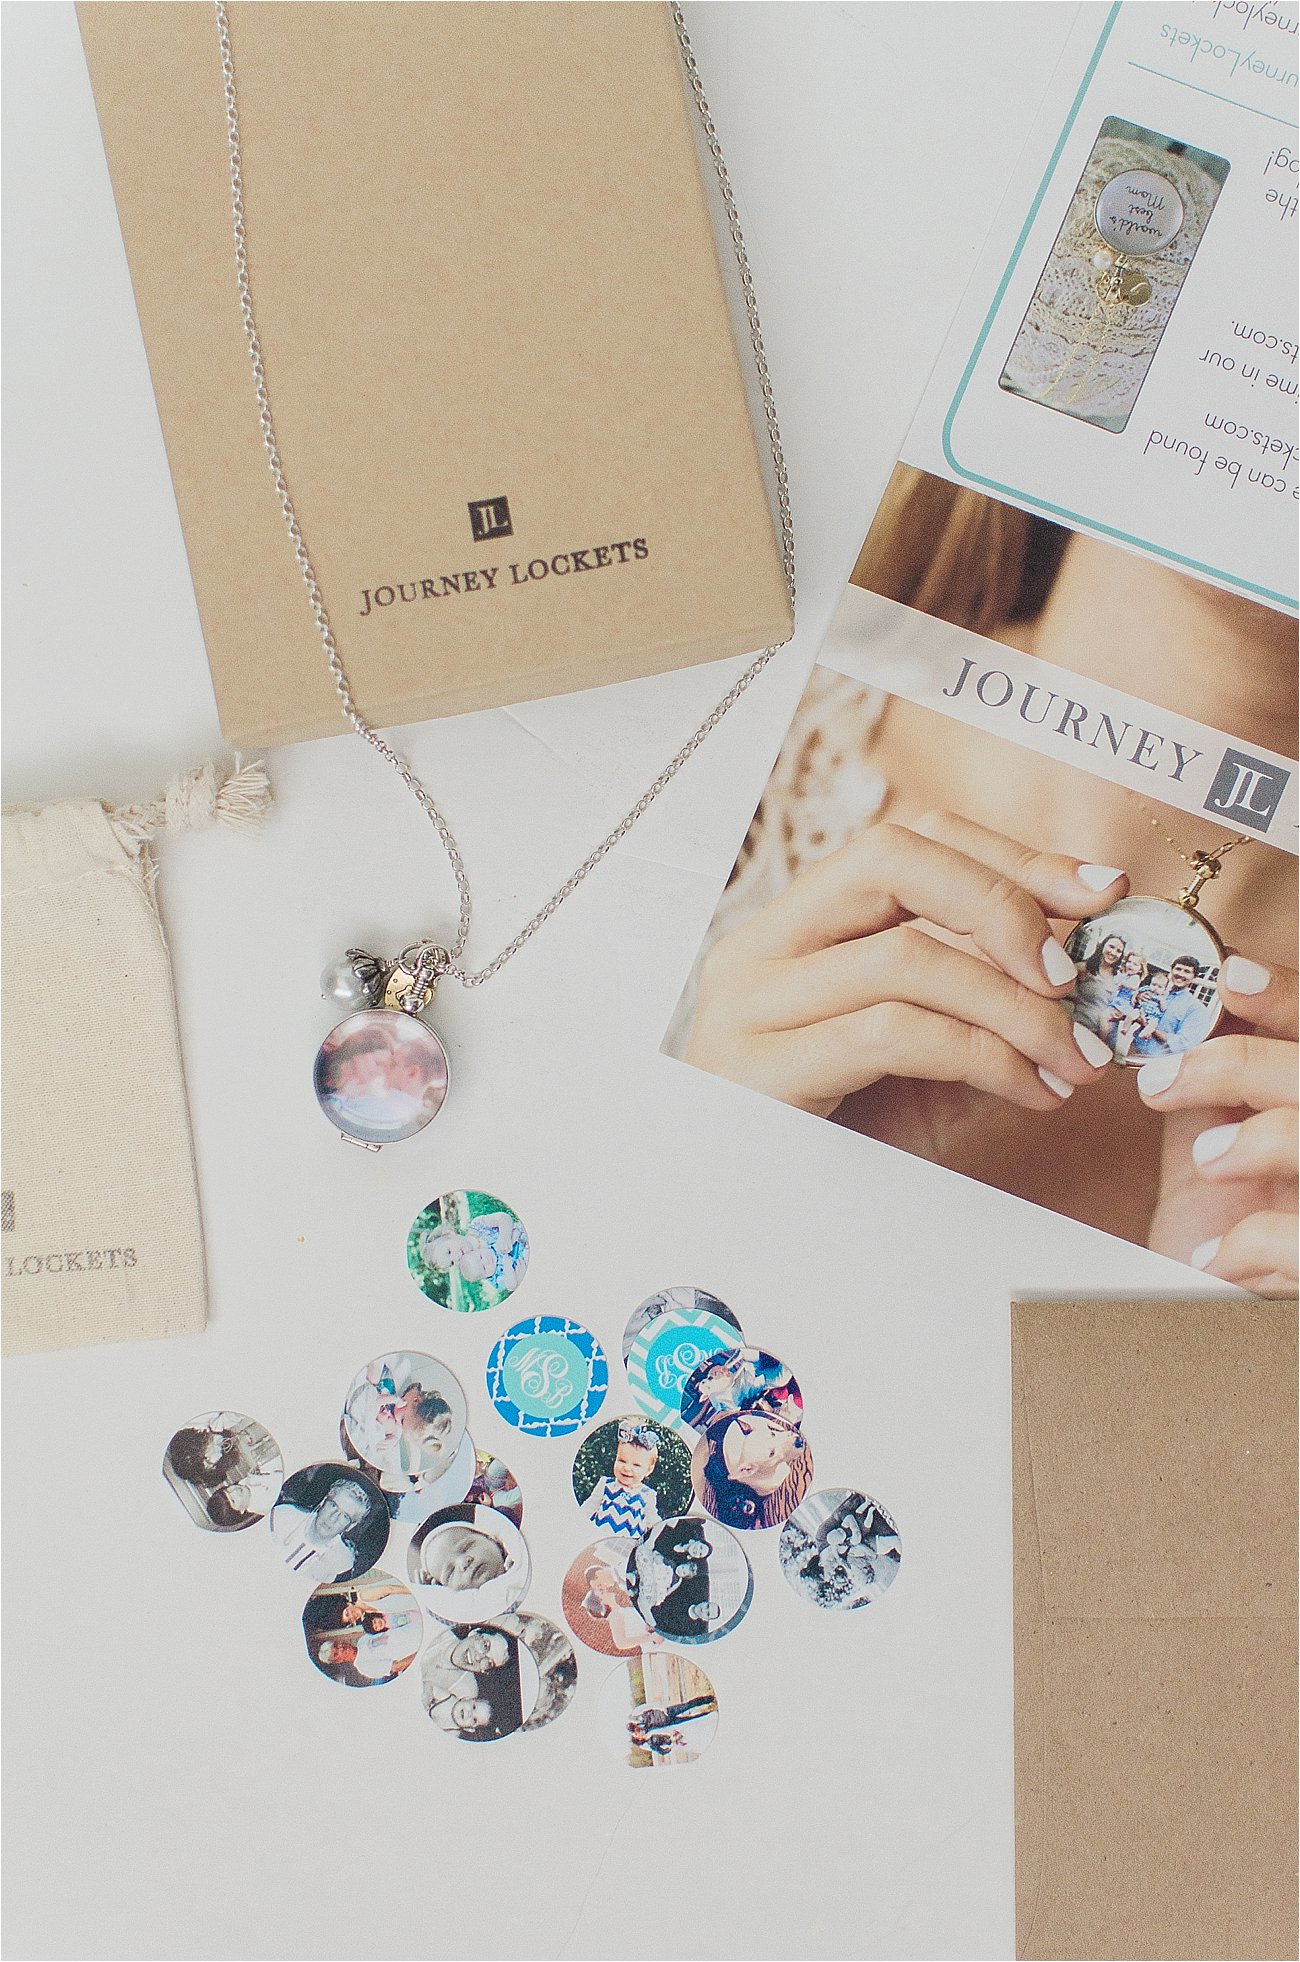 Journey Lockets, Meaningful Personalized Jewelry Review (1)